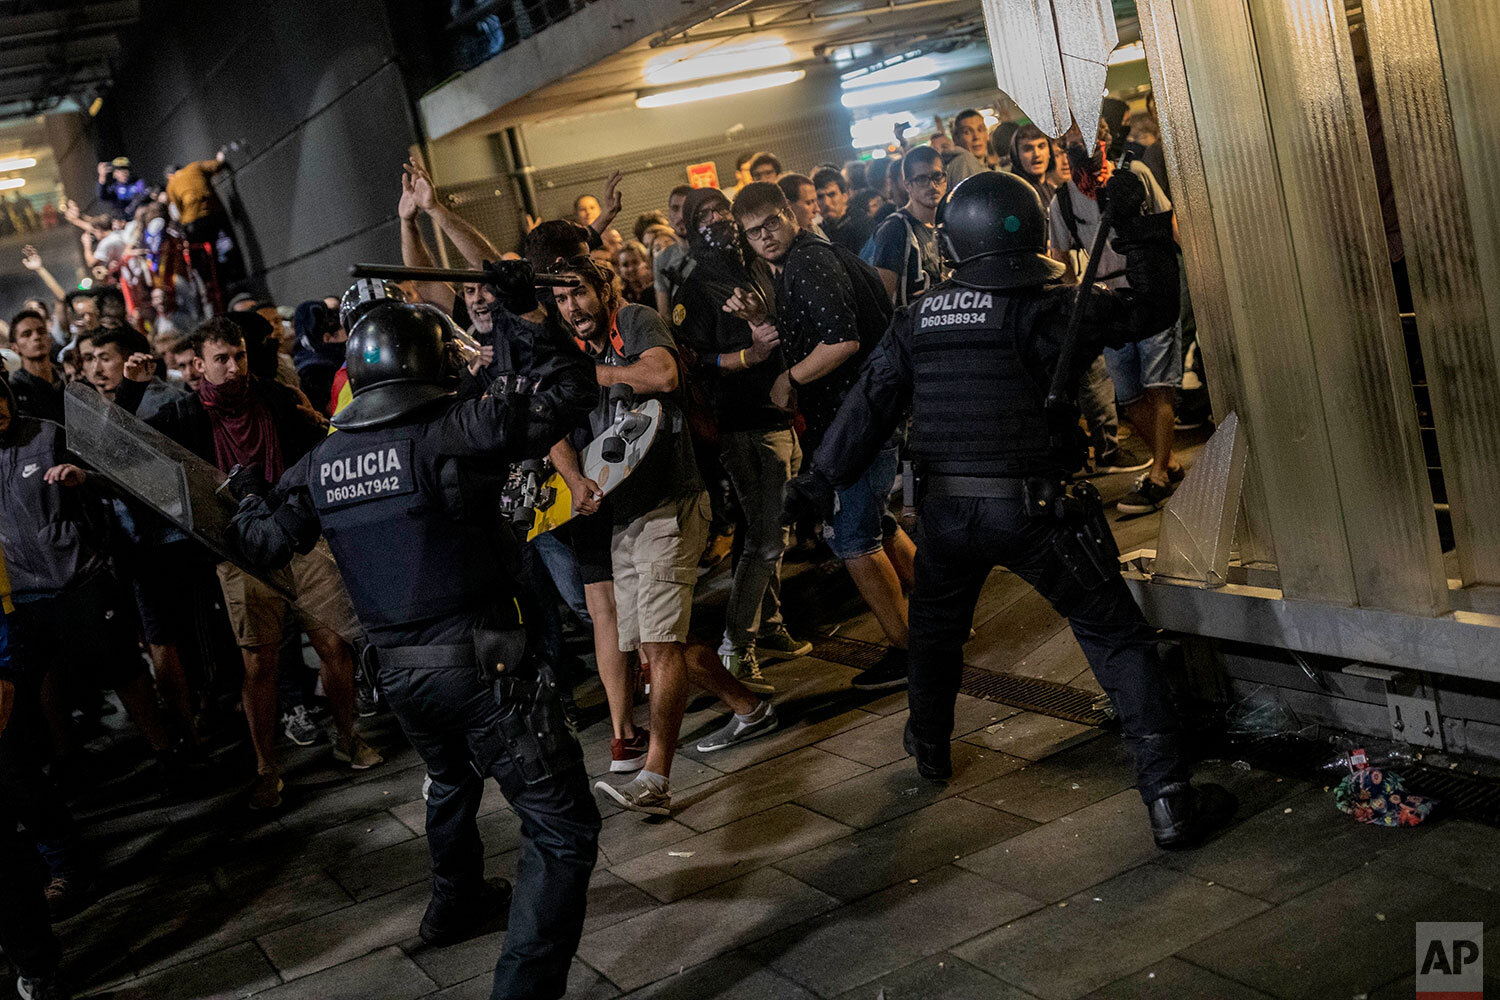  Police clash with protesters during a demonstration at El Prat airport, outskirts of Barcelona, Spain, Monday, Oct. 14, 2019. Spain's Supreme Court on Monday sentenced 12 prominent former Catalan politicians and activists to lengthly prison terms fo